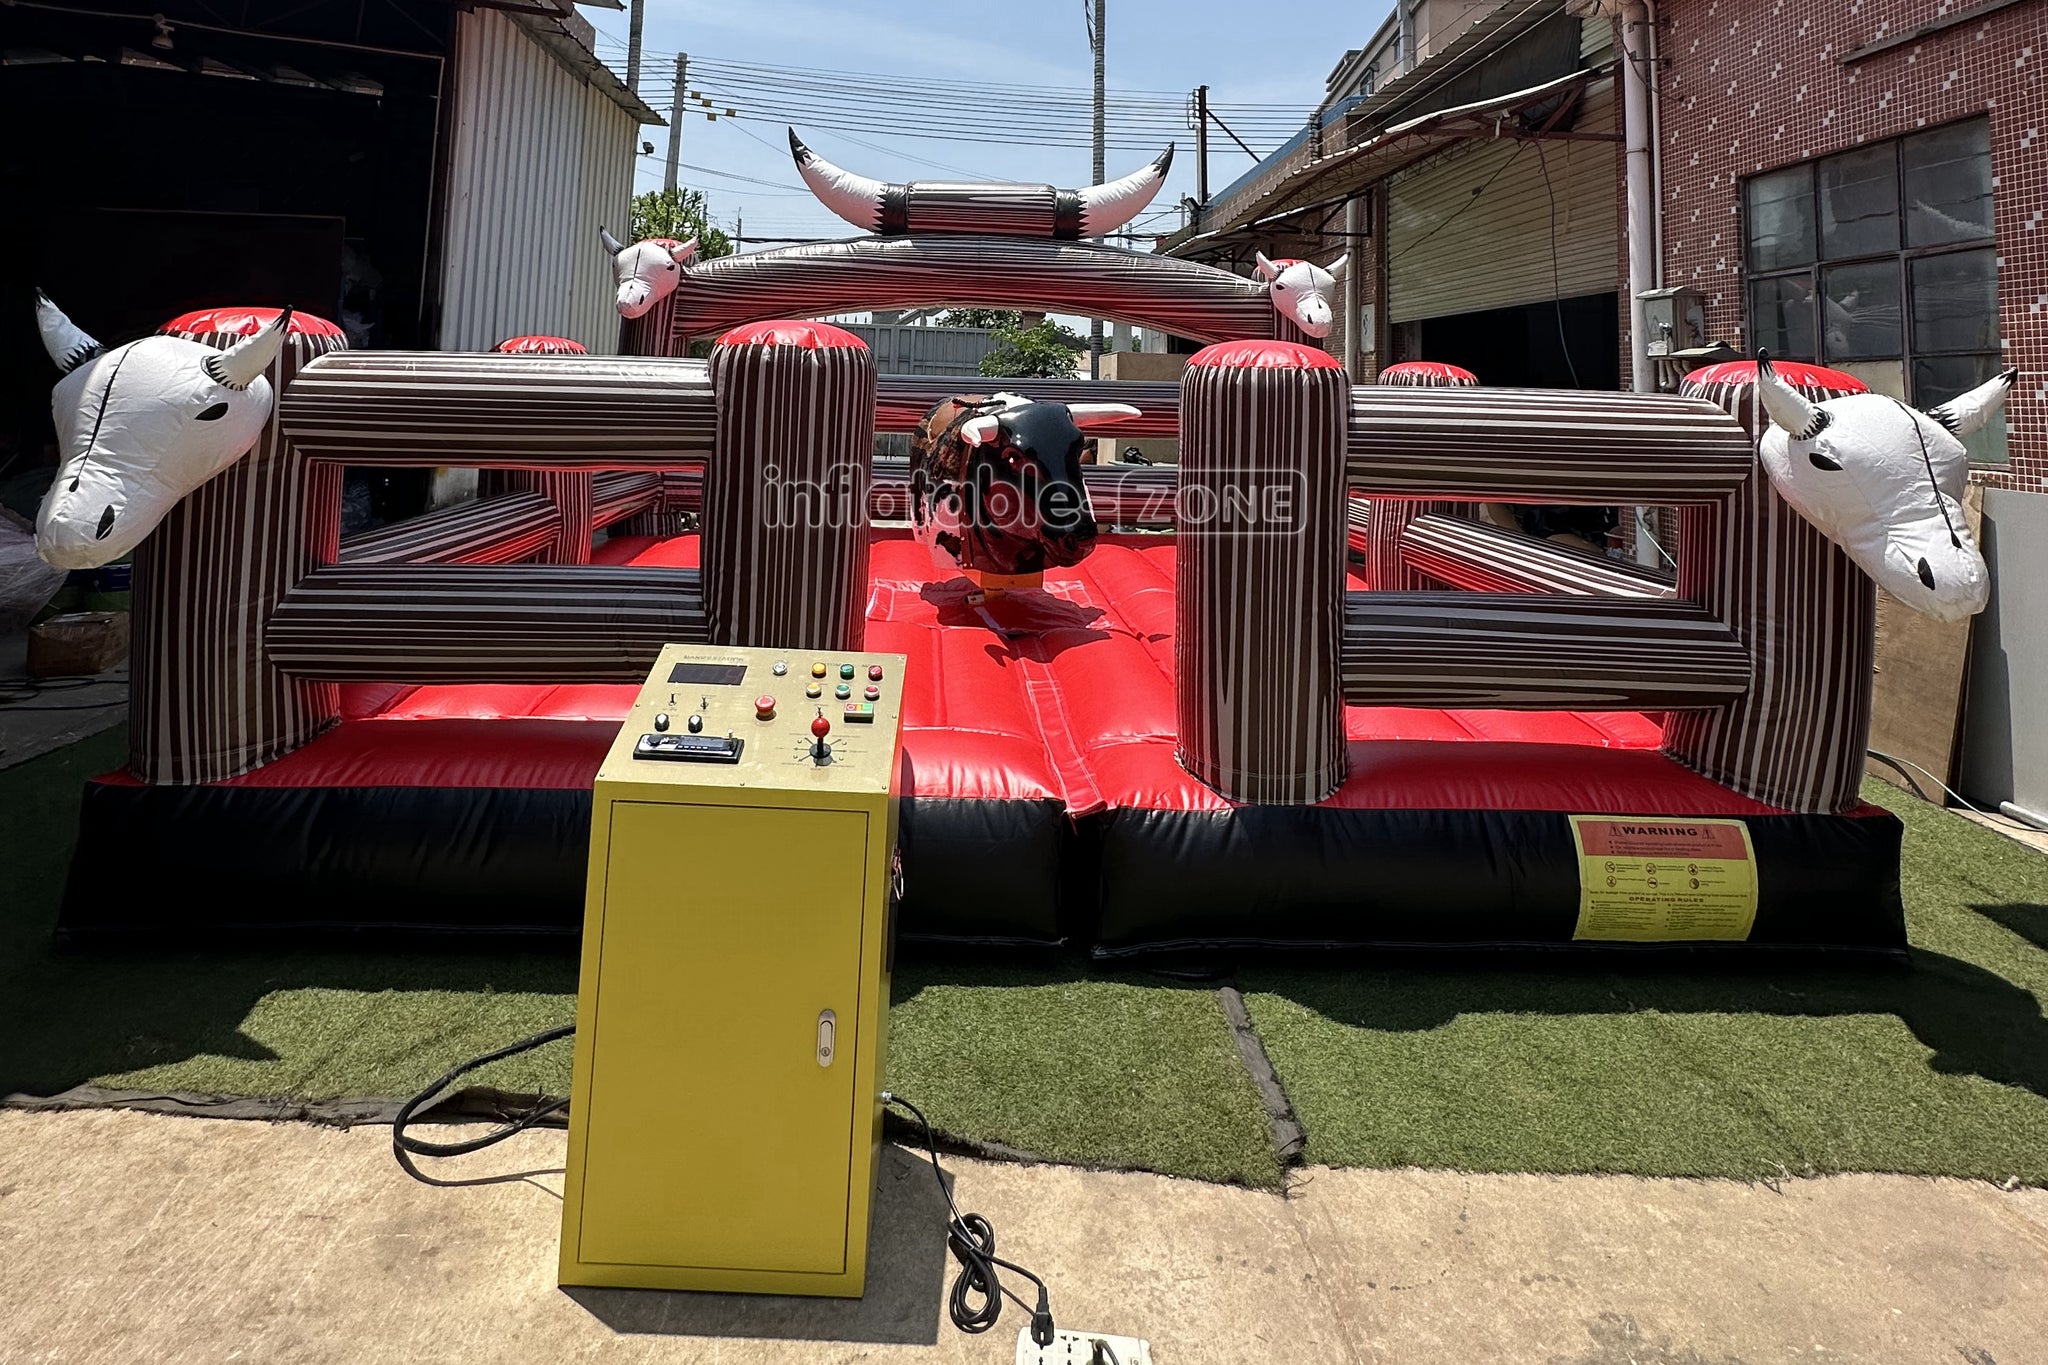 Inflatable Bull Ride Rent Electric Bull Prices On Mechanical Bulls